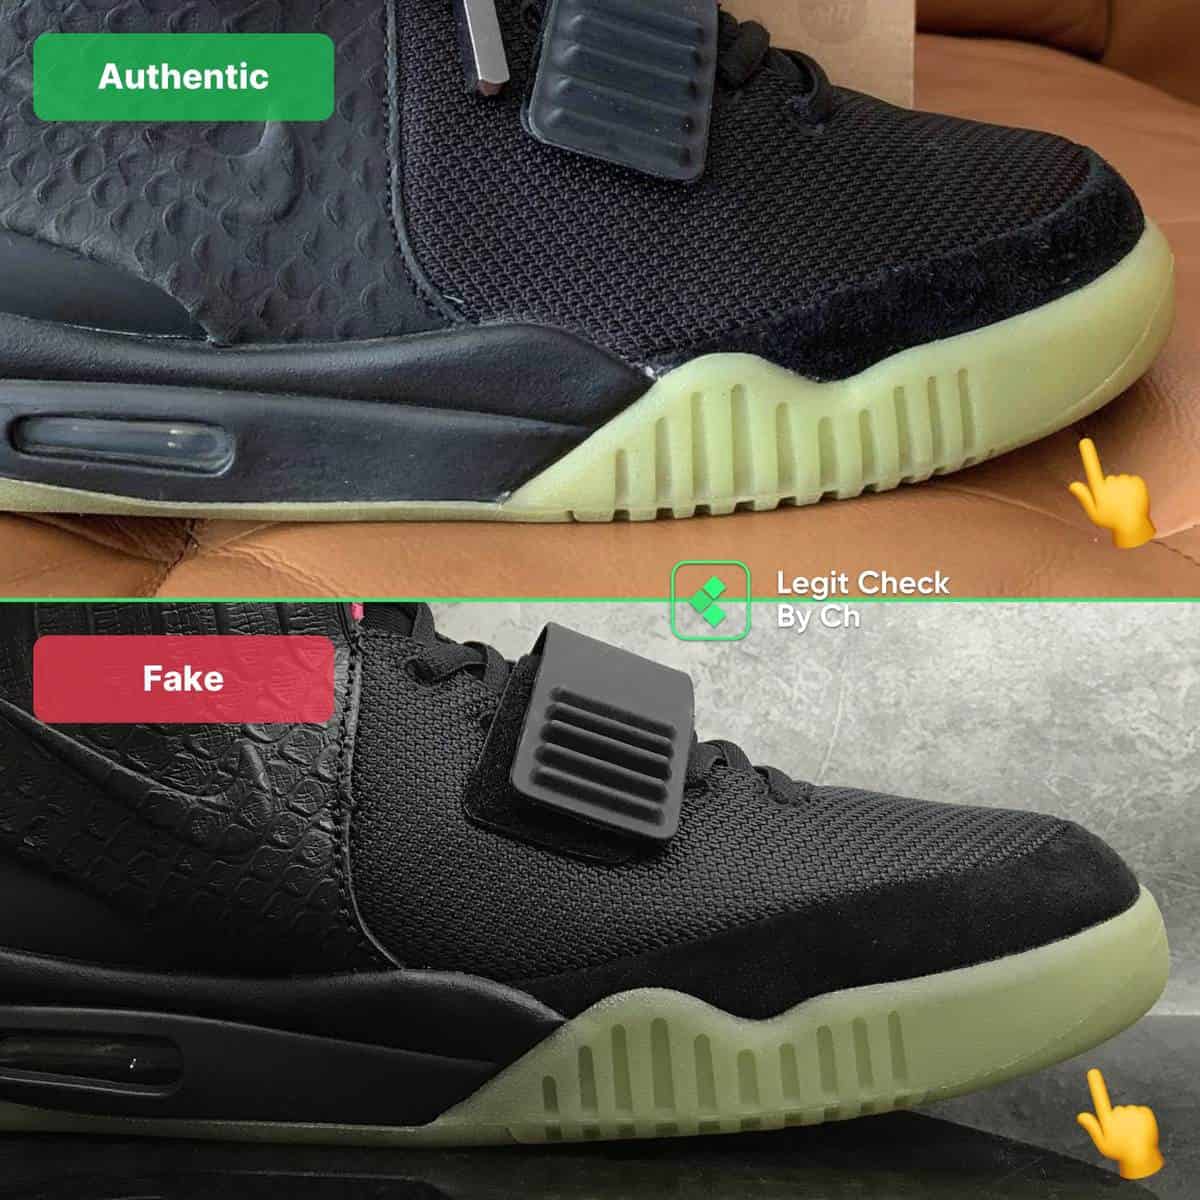 To Spot Fake Nike Air Yeezy 2 Solar Red NRG - Legit By Ch